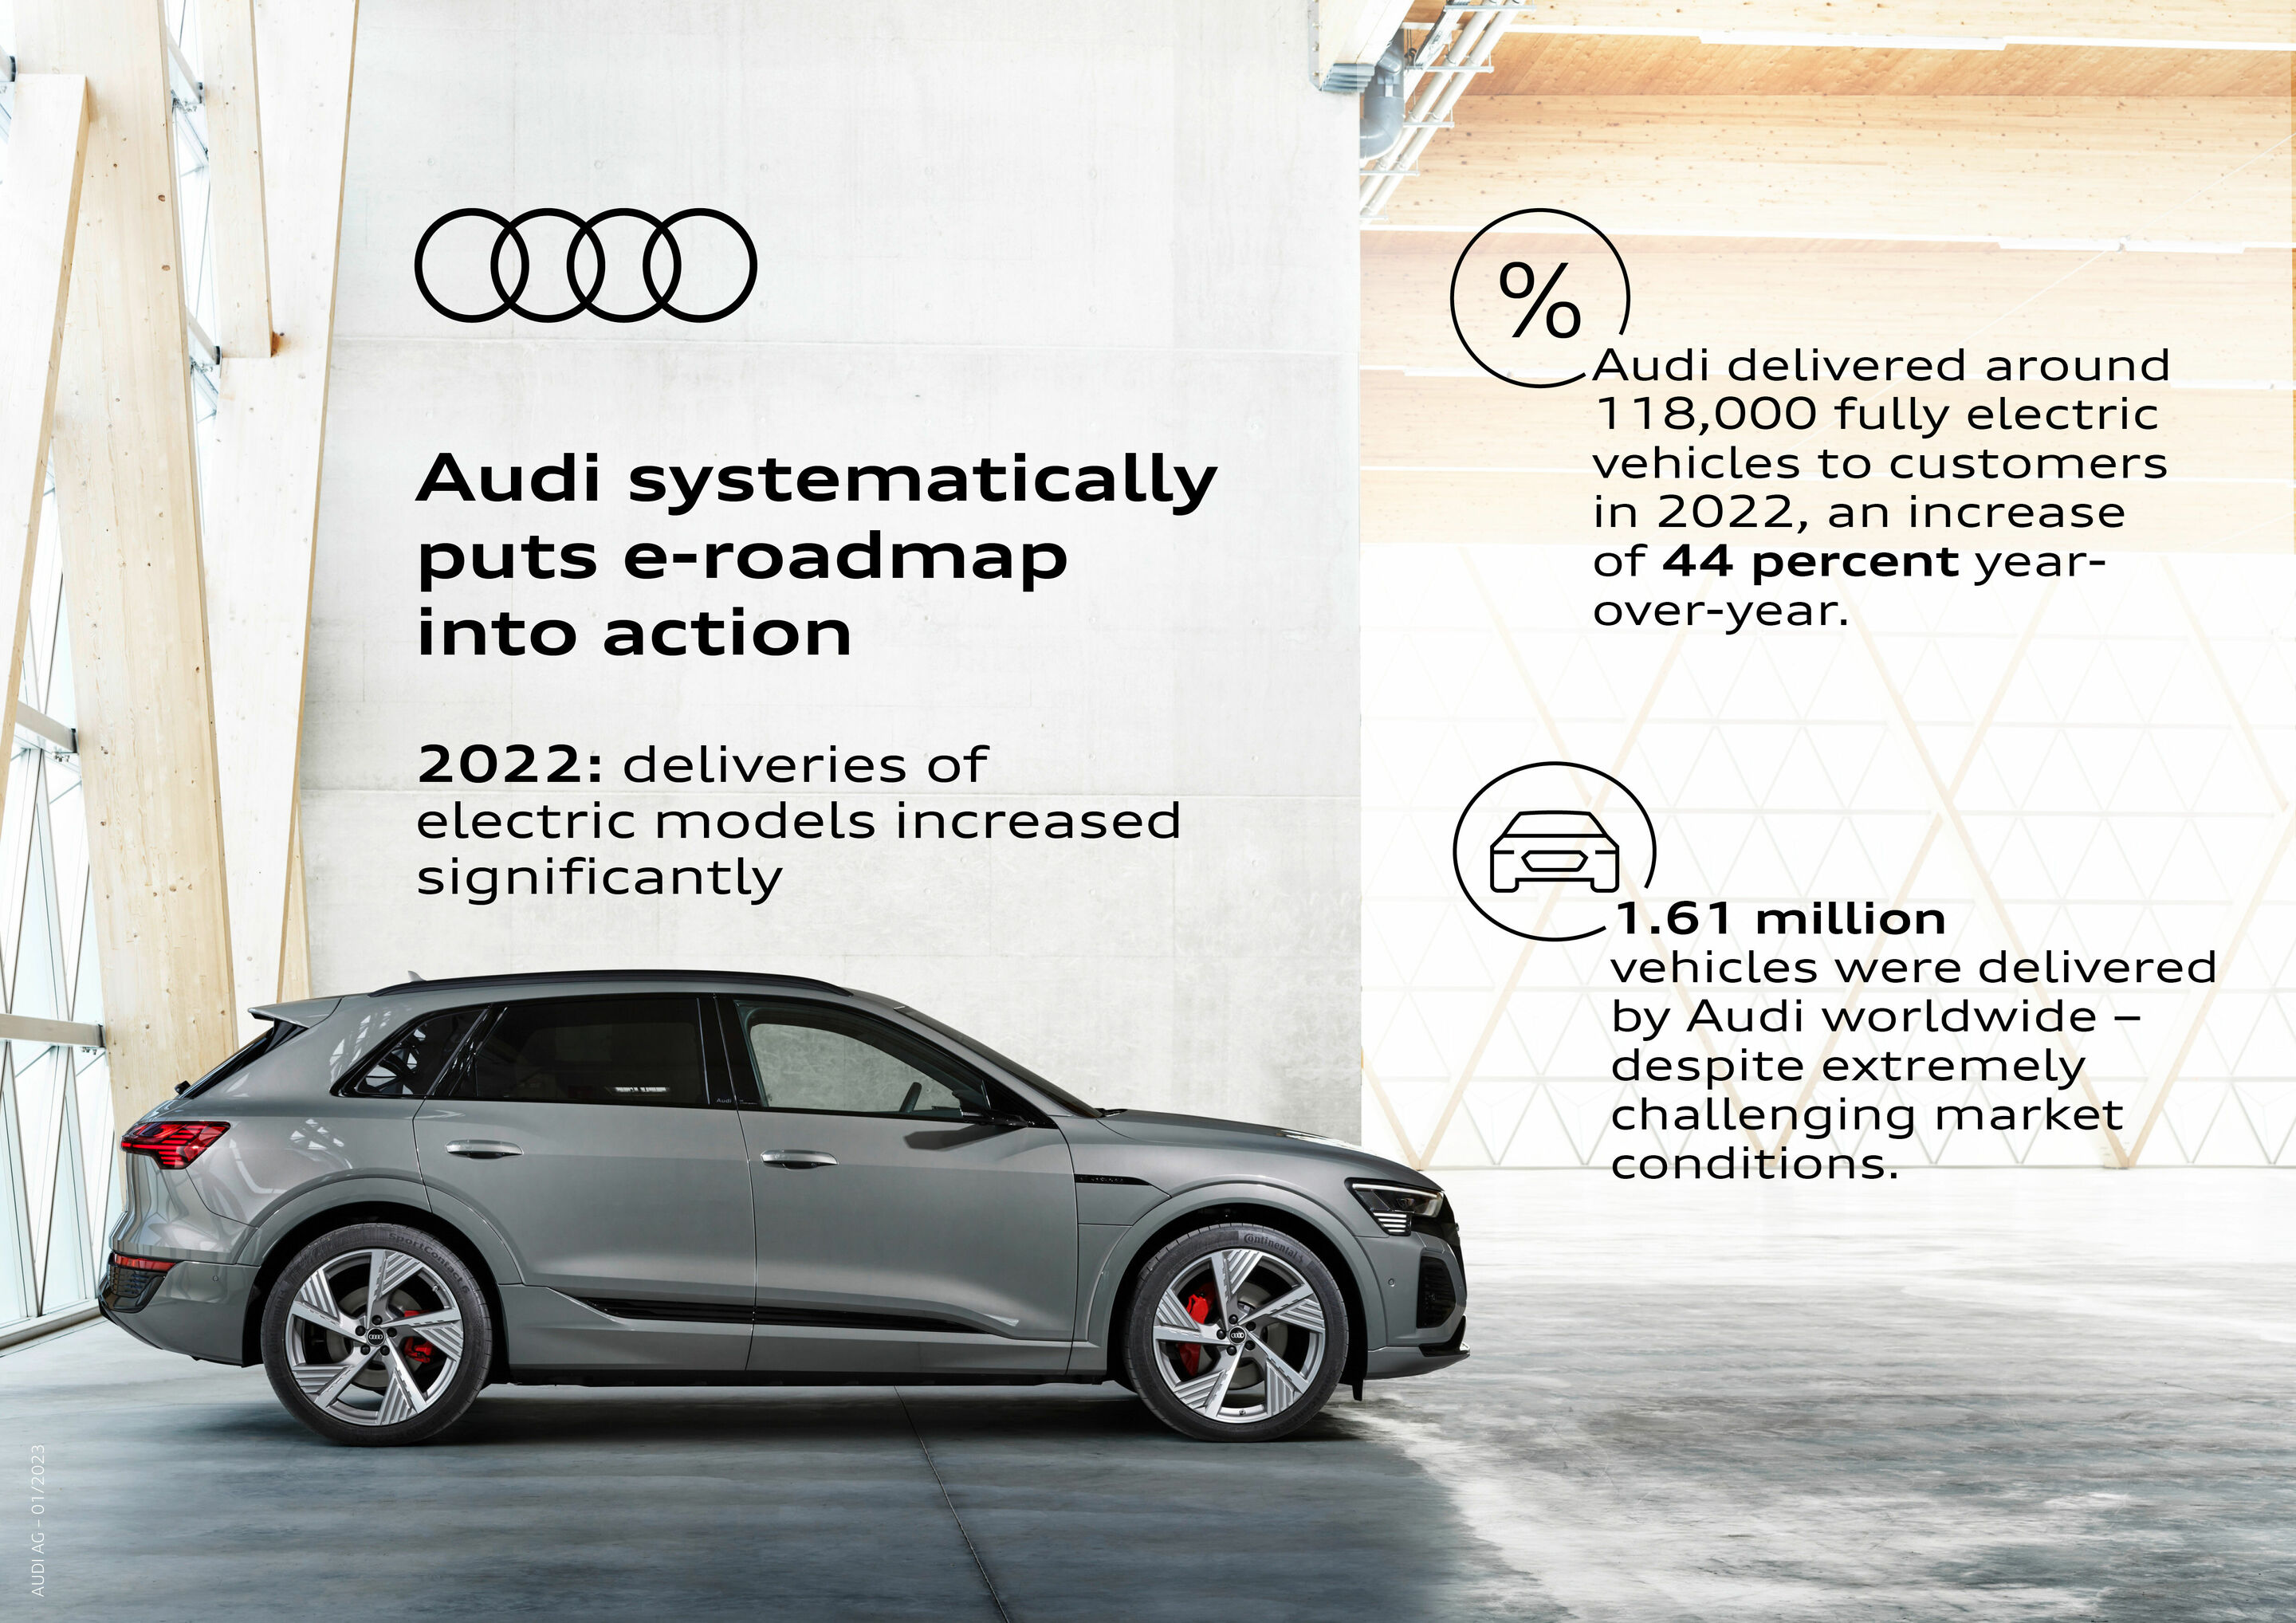 Audi systematically puts e-roadmap into action